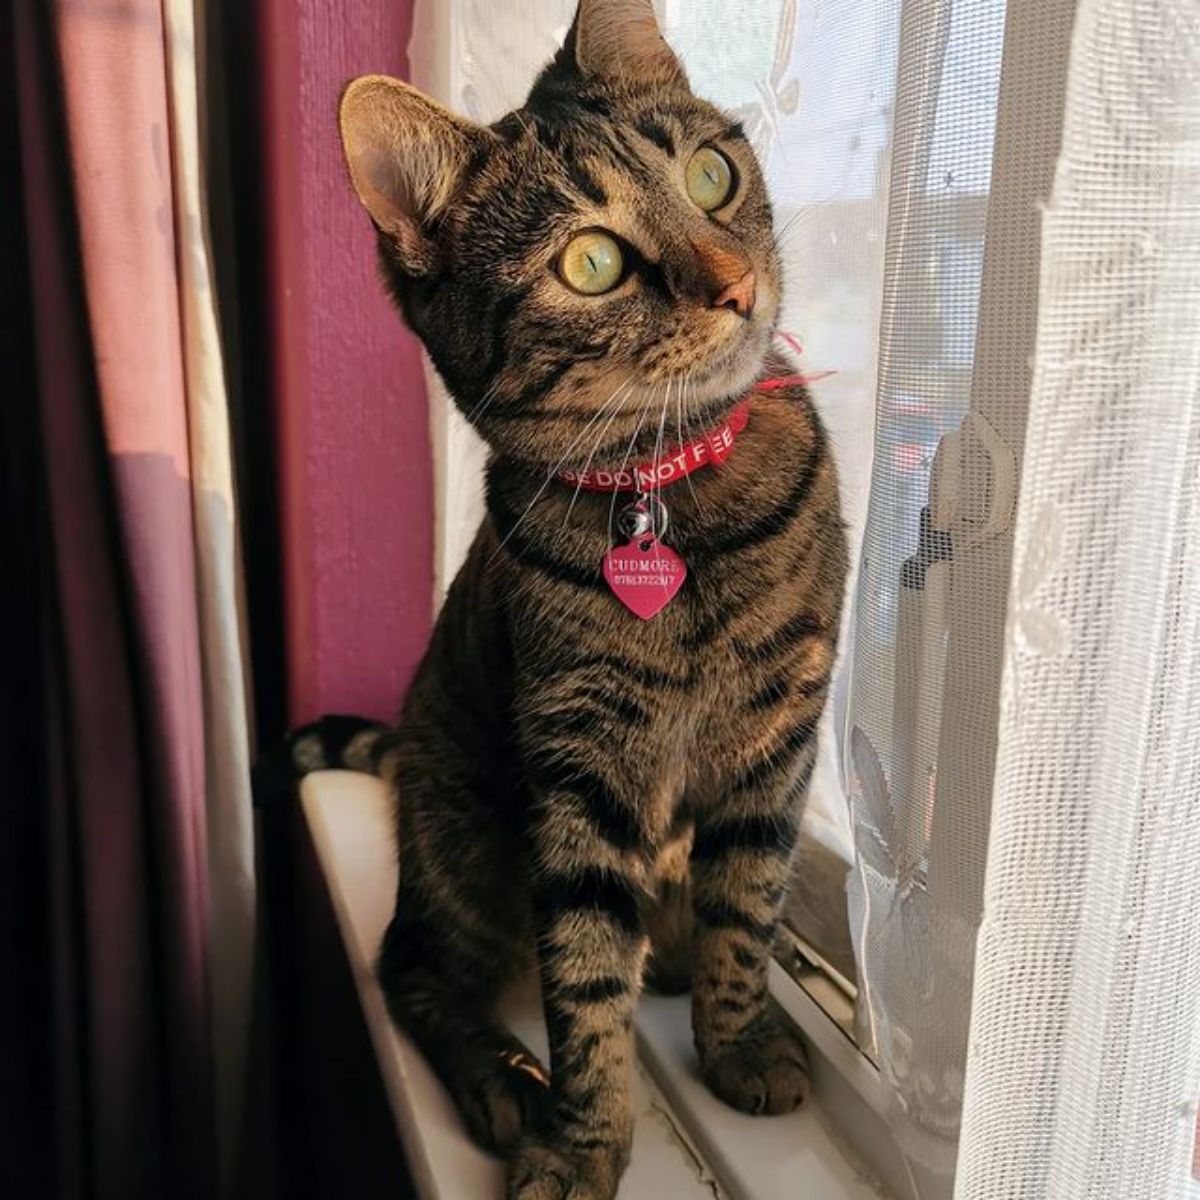 brown tabby cat sitting on a window sill and looking out the window